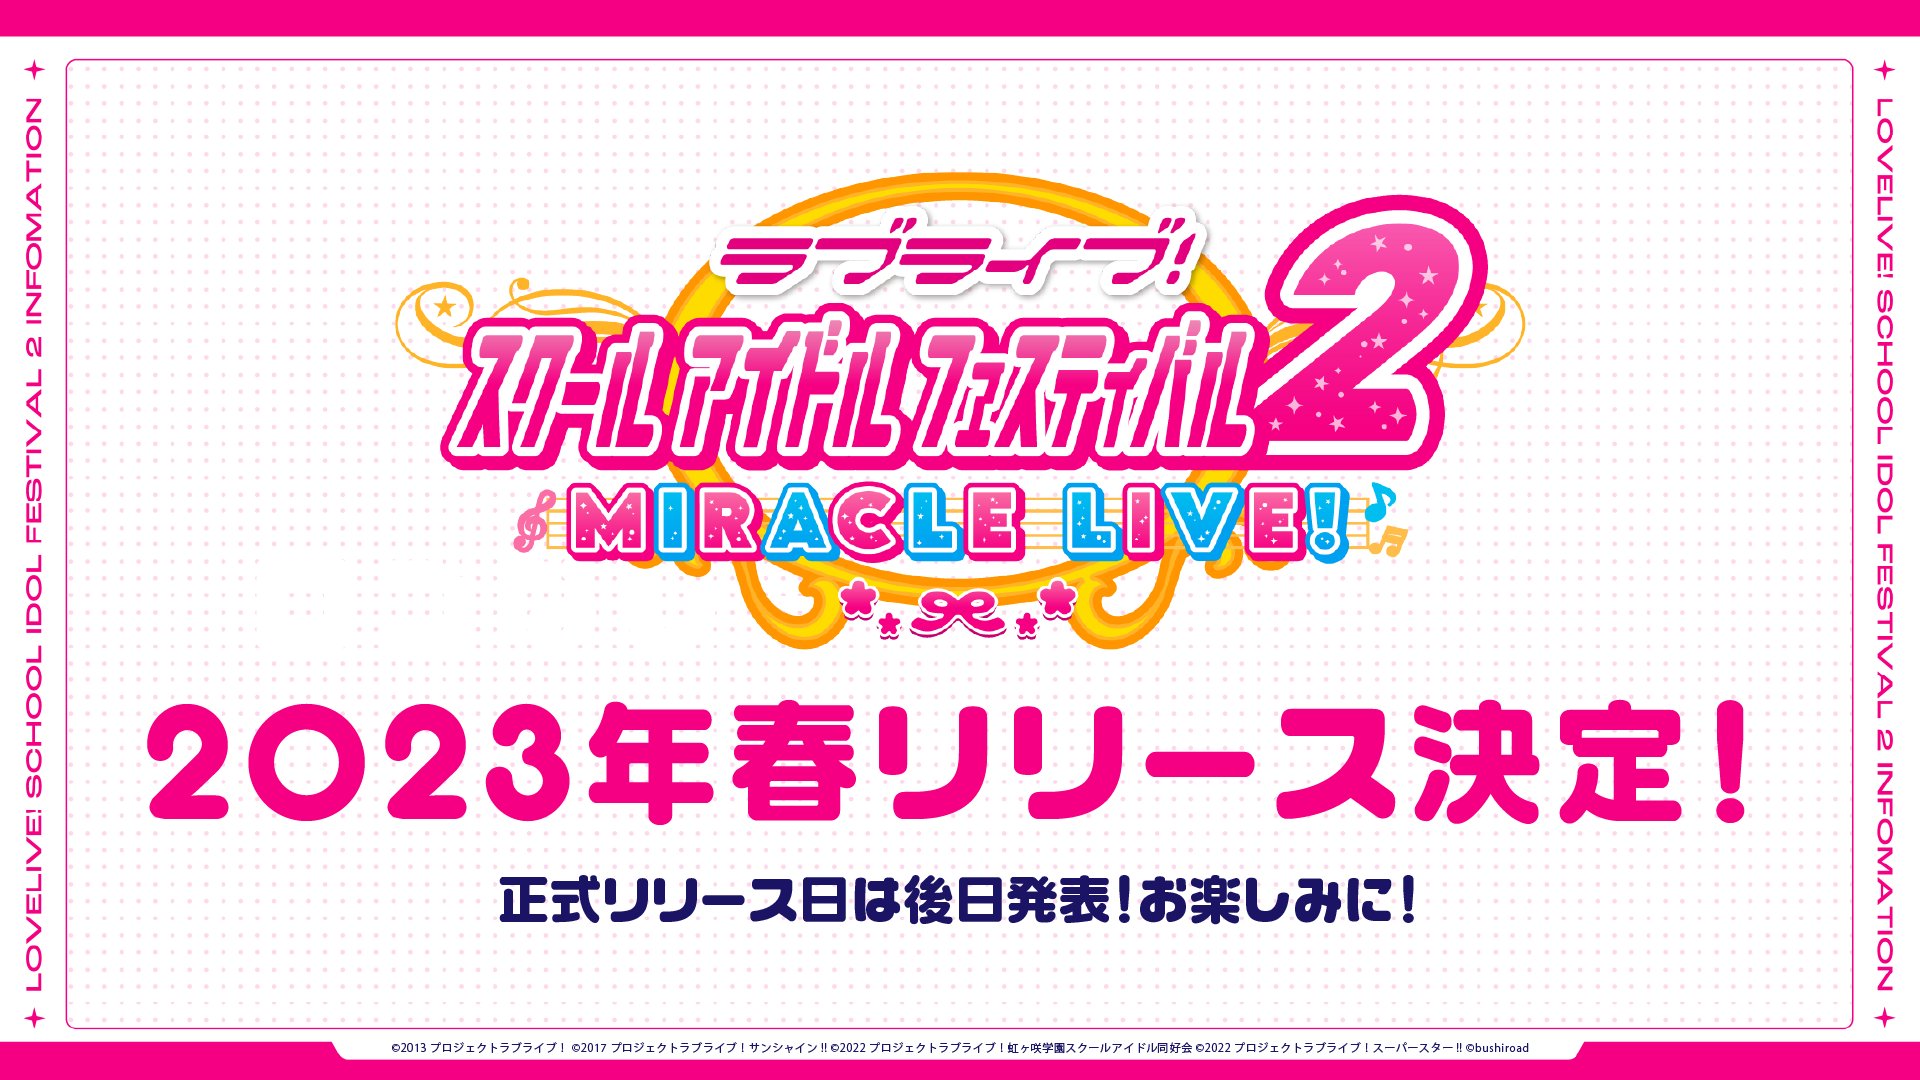 Love Stay! College Idol Pageant 2 Miracle Stay! Cellular Sport to Launch in Spring 2023